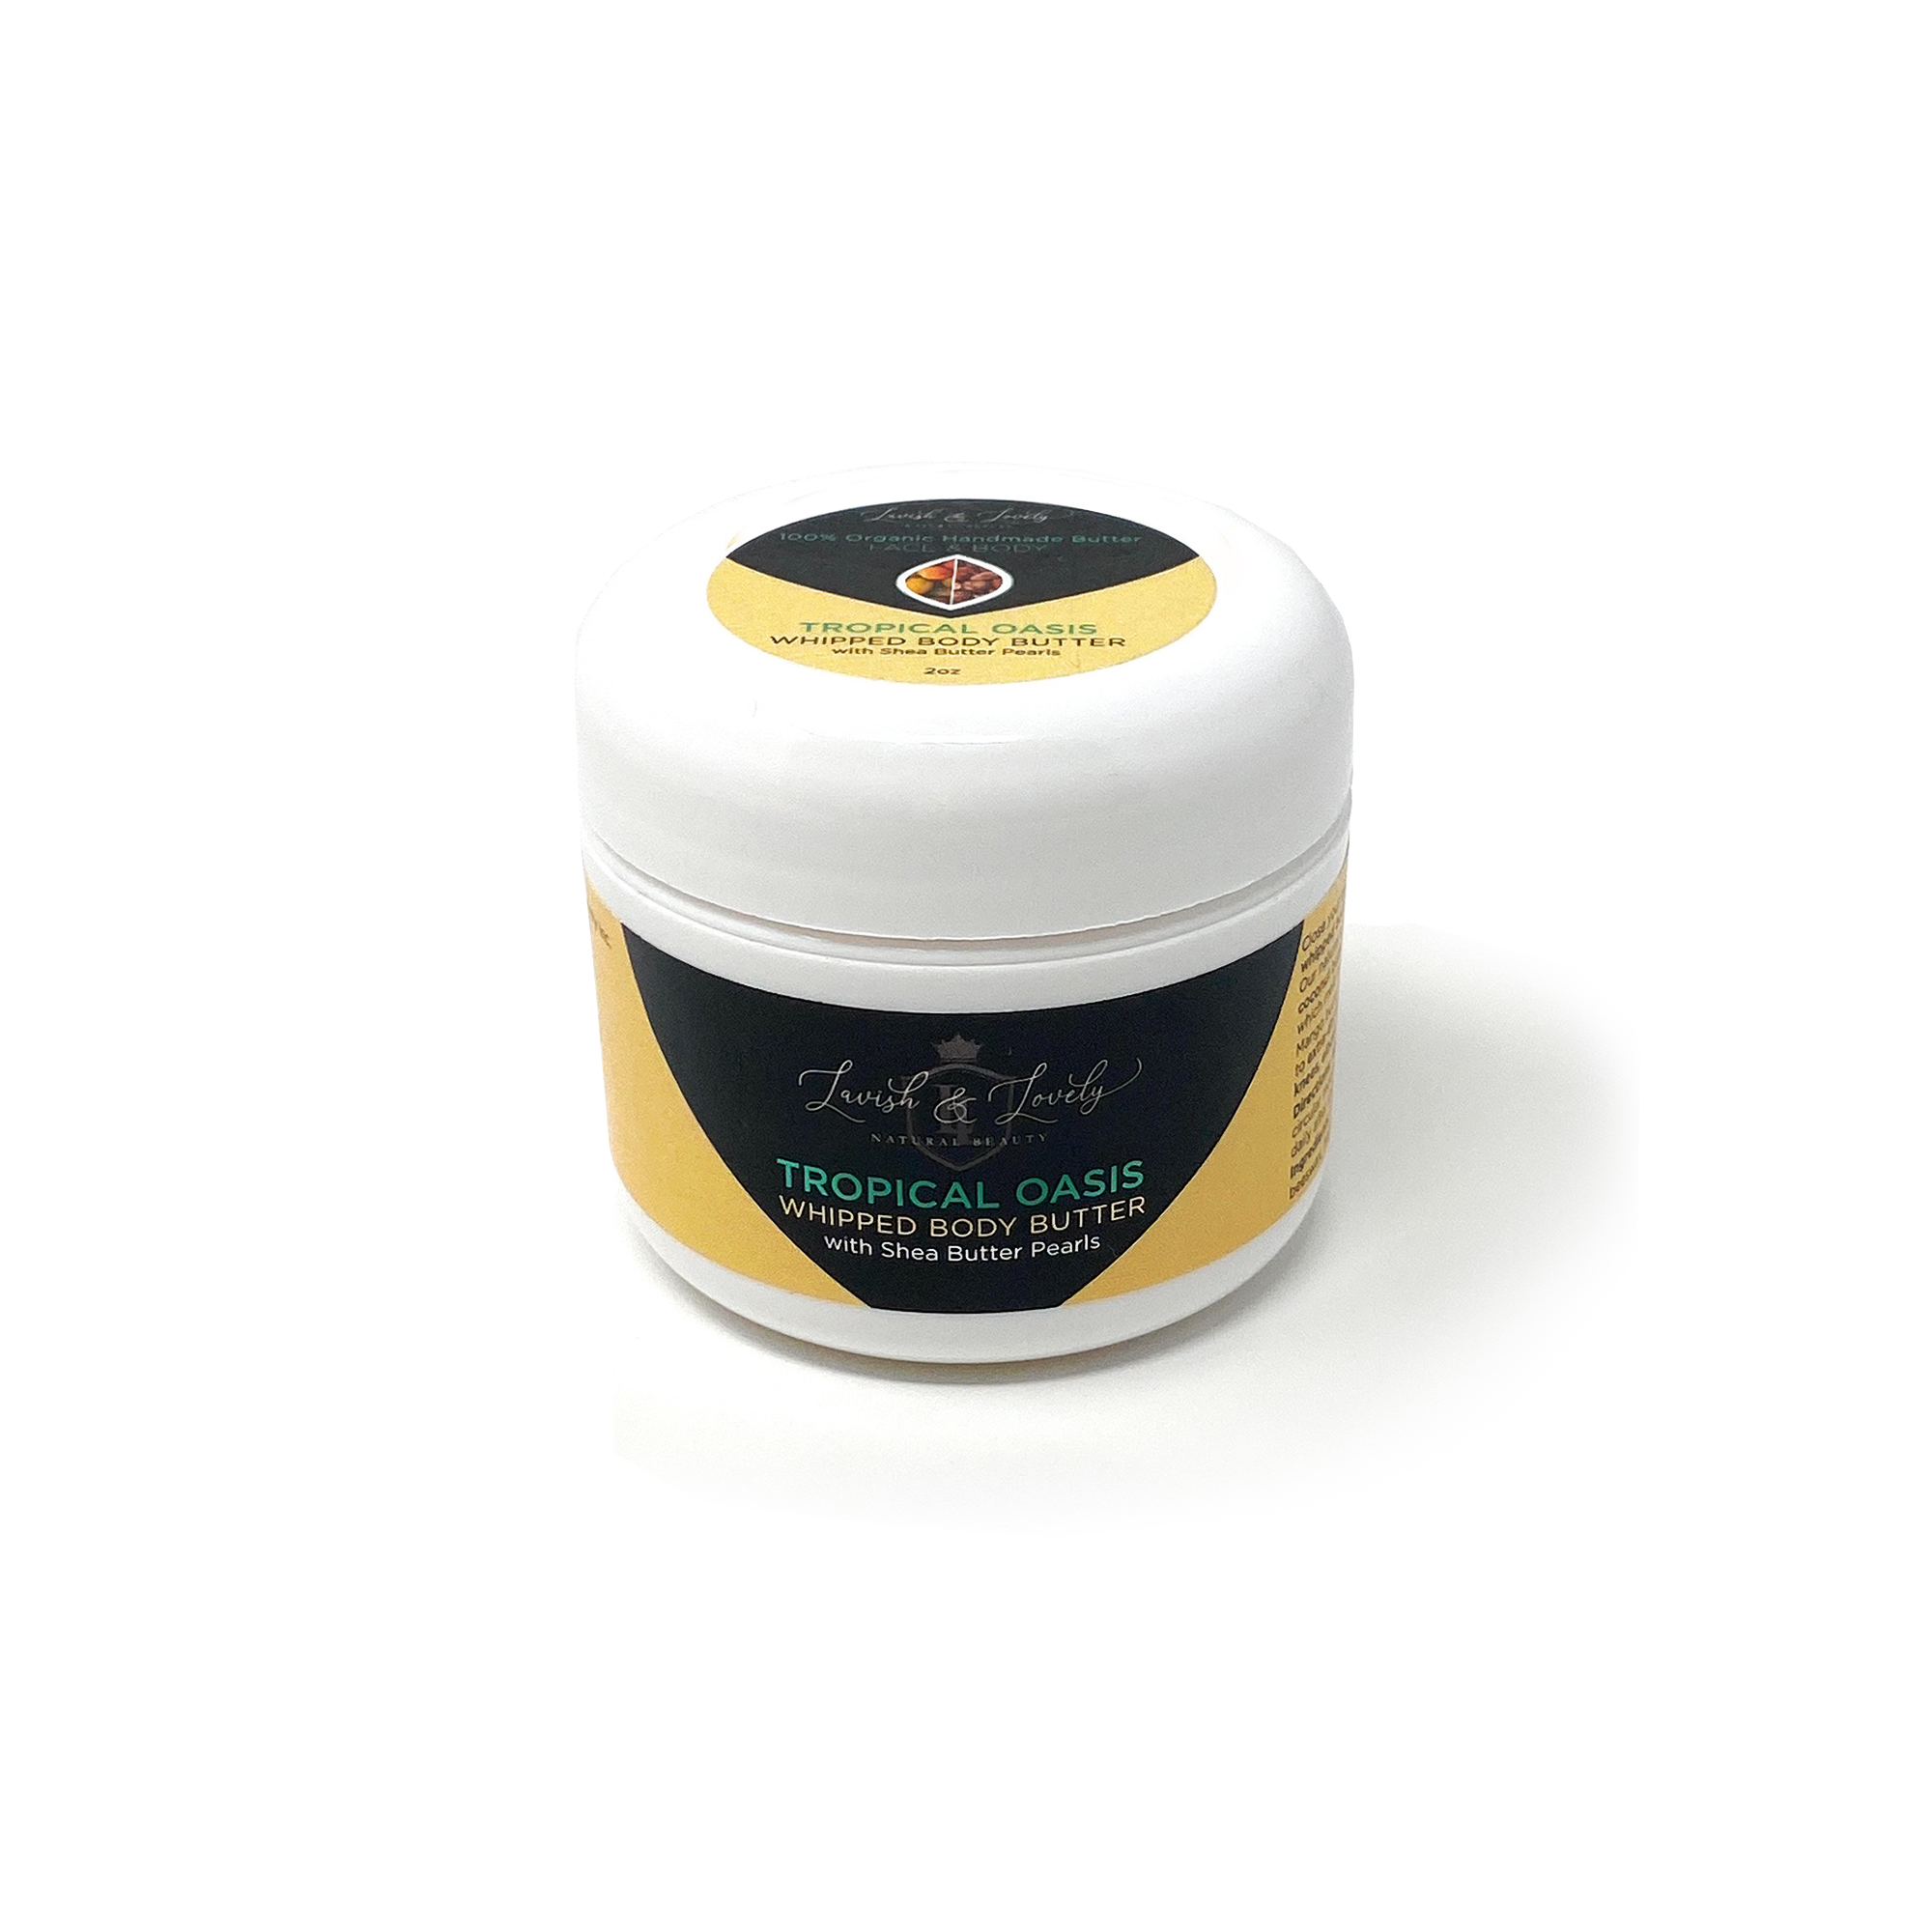 Lavish & Lovely - Tropical Oasis Scented Whipped Body Butter with Shea Pearls (2oz)